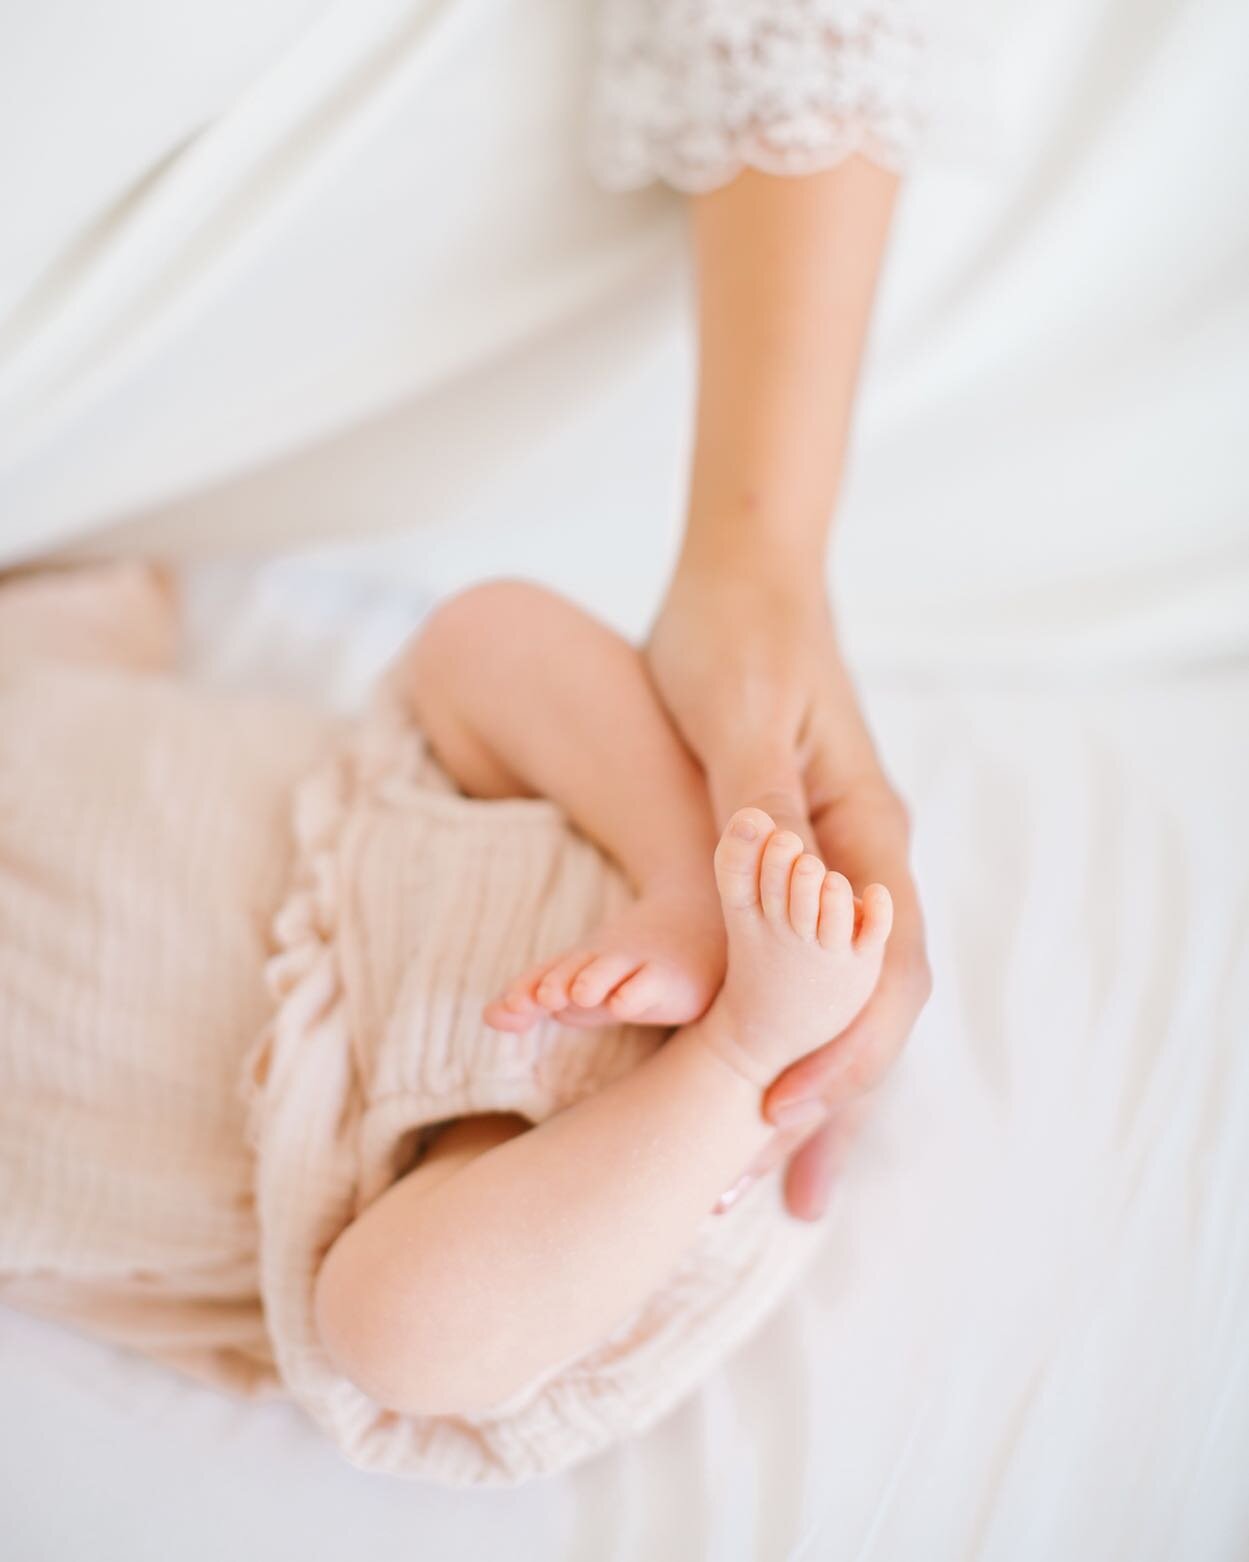 loads of new borns sessions are on the way and each time i cannot get enough of the tiny toes 👣🤗 #babiesbyyelijoe 
.
.
.
.
.
.

#thatsdarling&nbsp;&nbsp;#familysession #babyphotos&nbsp;#happybaby&nbsp;#babysfirst #thehappynow&nbsp;#makeportraits #c